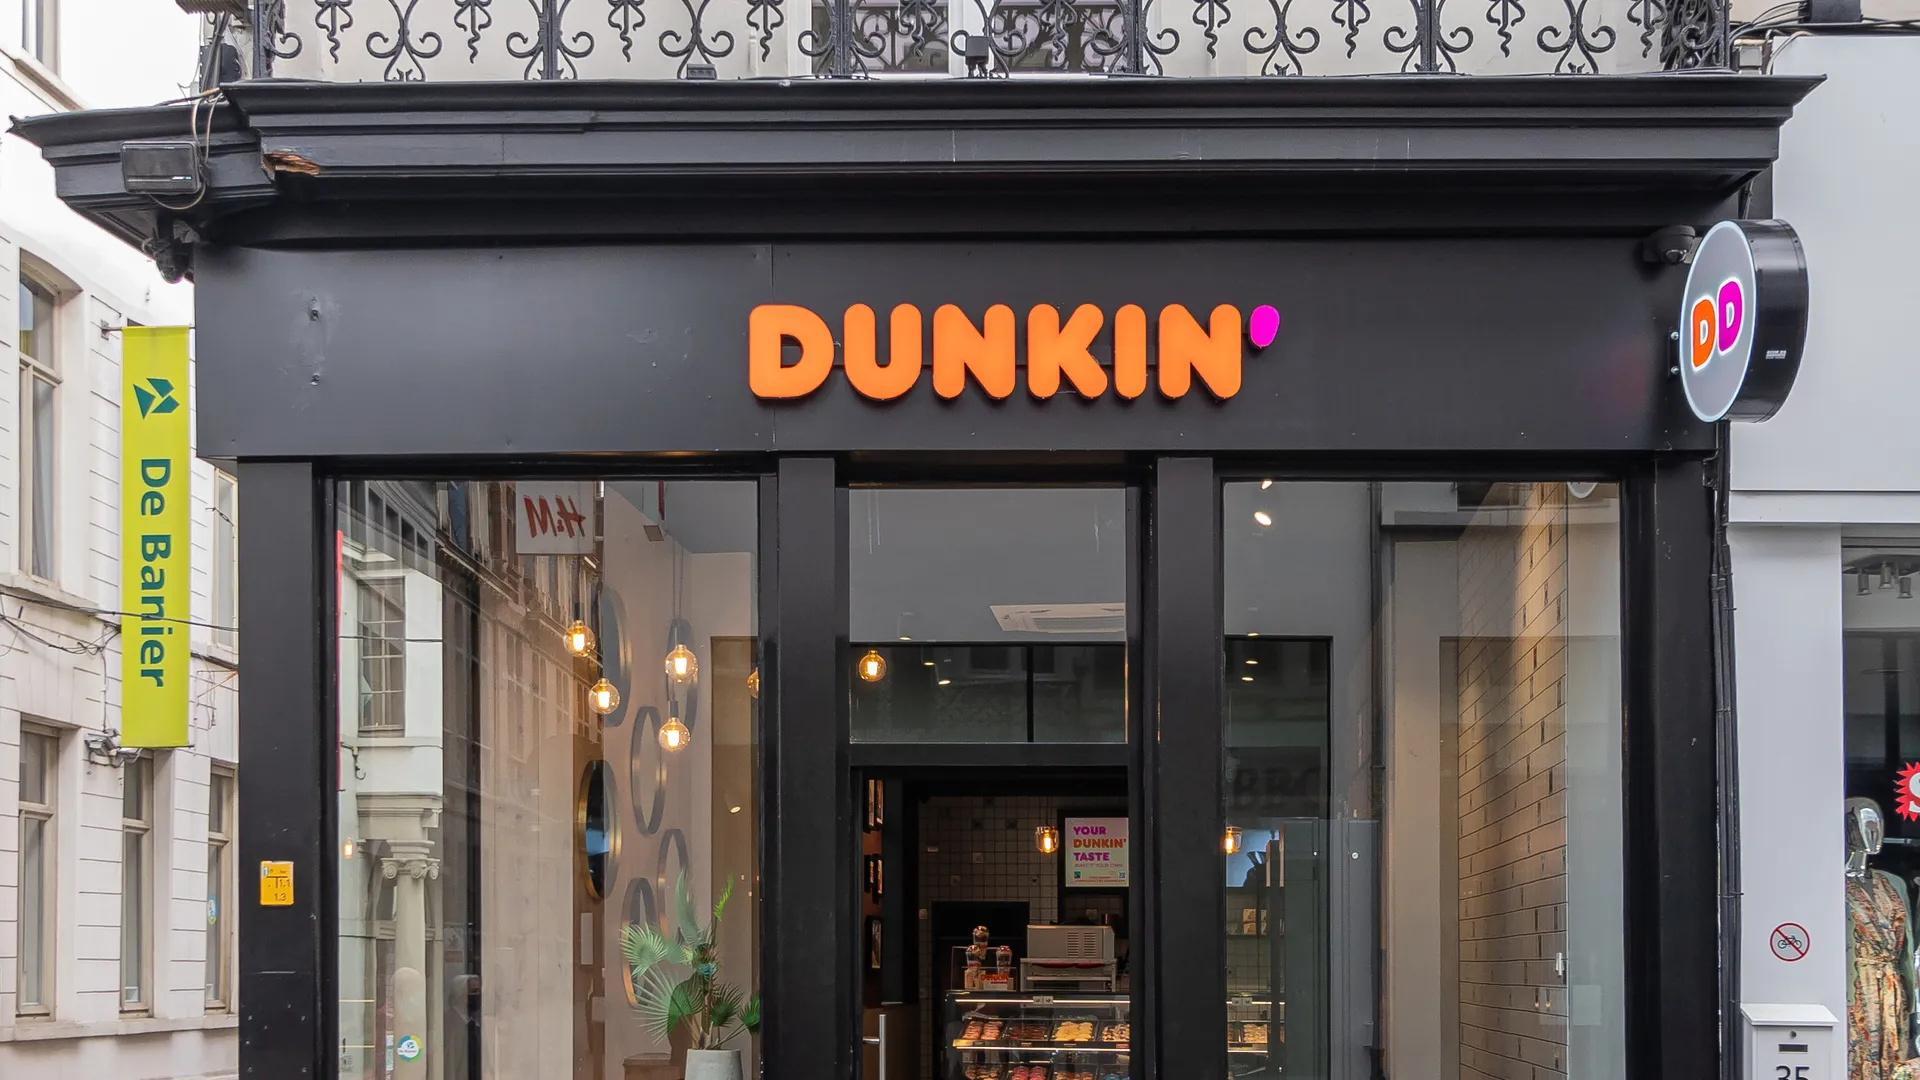 Gent, Flanders, Belgium - July 30, 2021: Dunkin Donuts store black and window facade on corner showing display inside and advertising as DD.